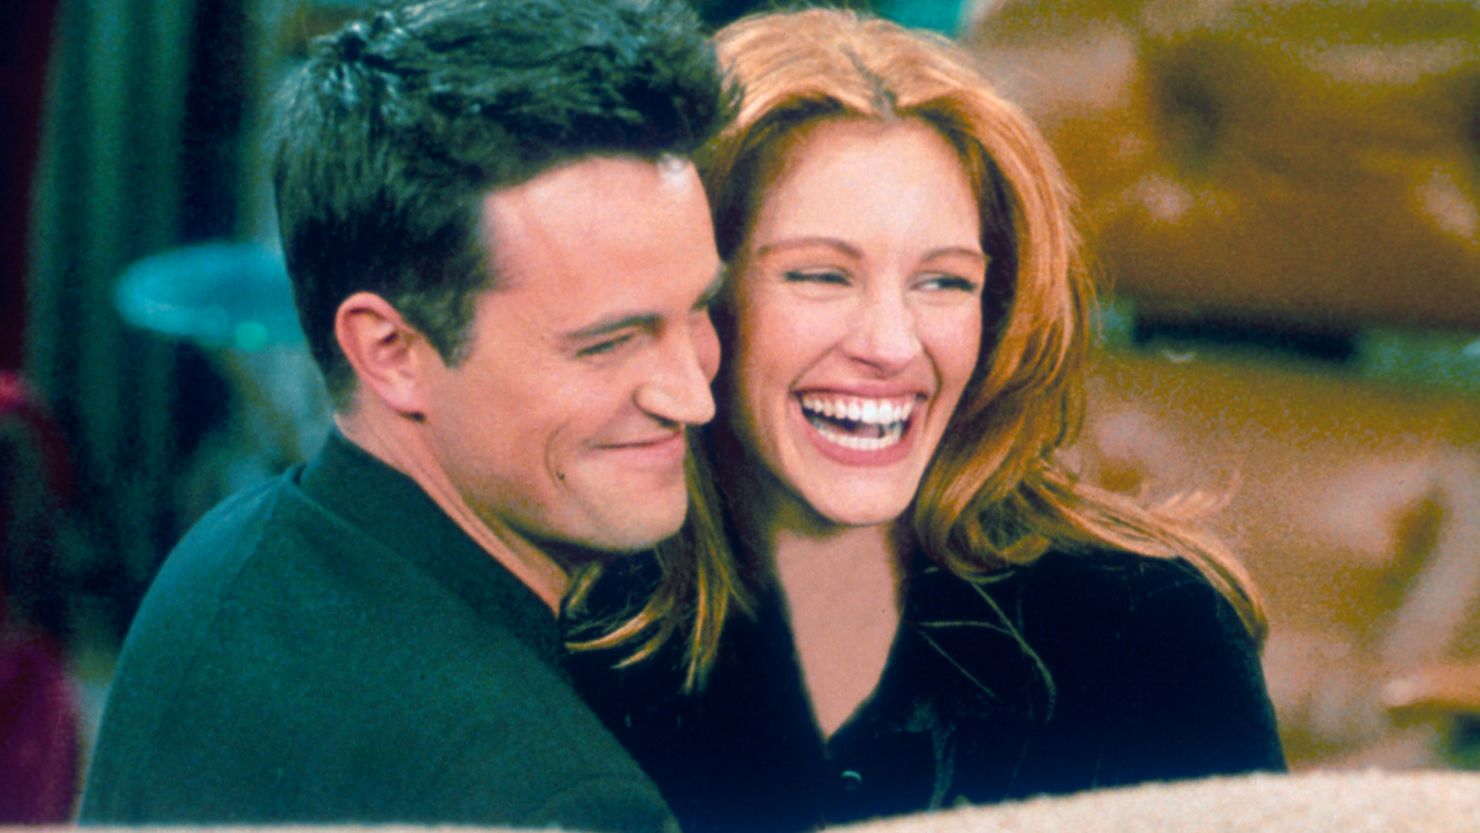 Matthew Perry and actress Julia Roberts hug each other on the set of "Friends" in 1996.